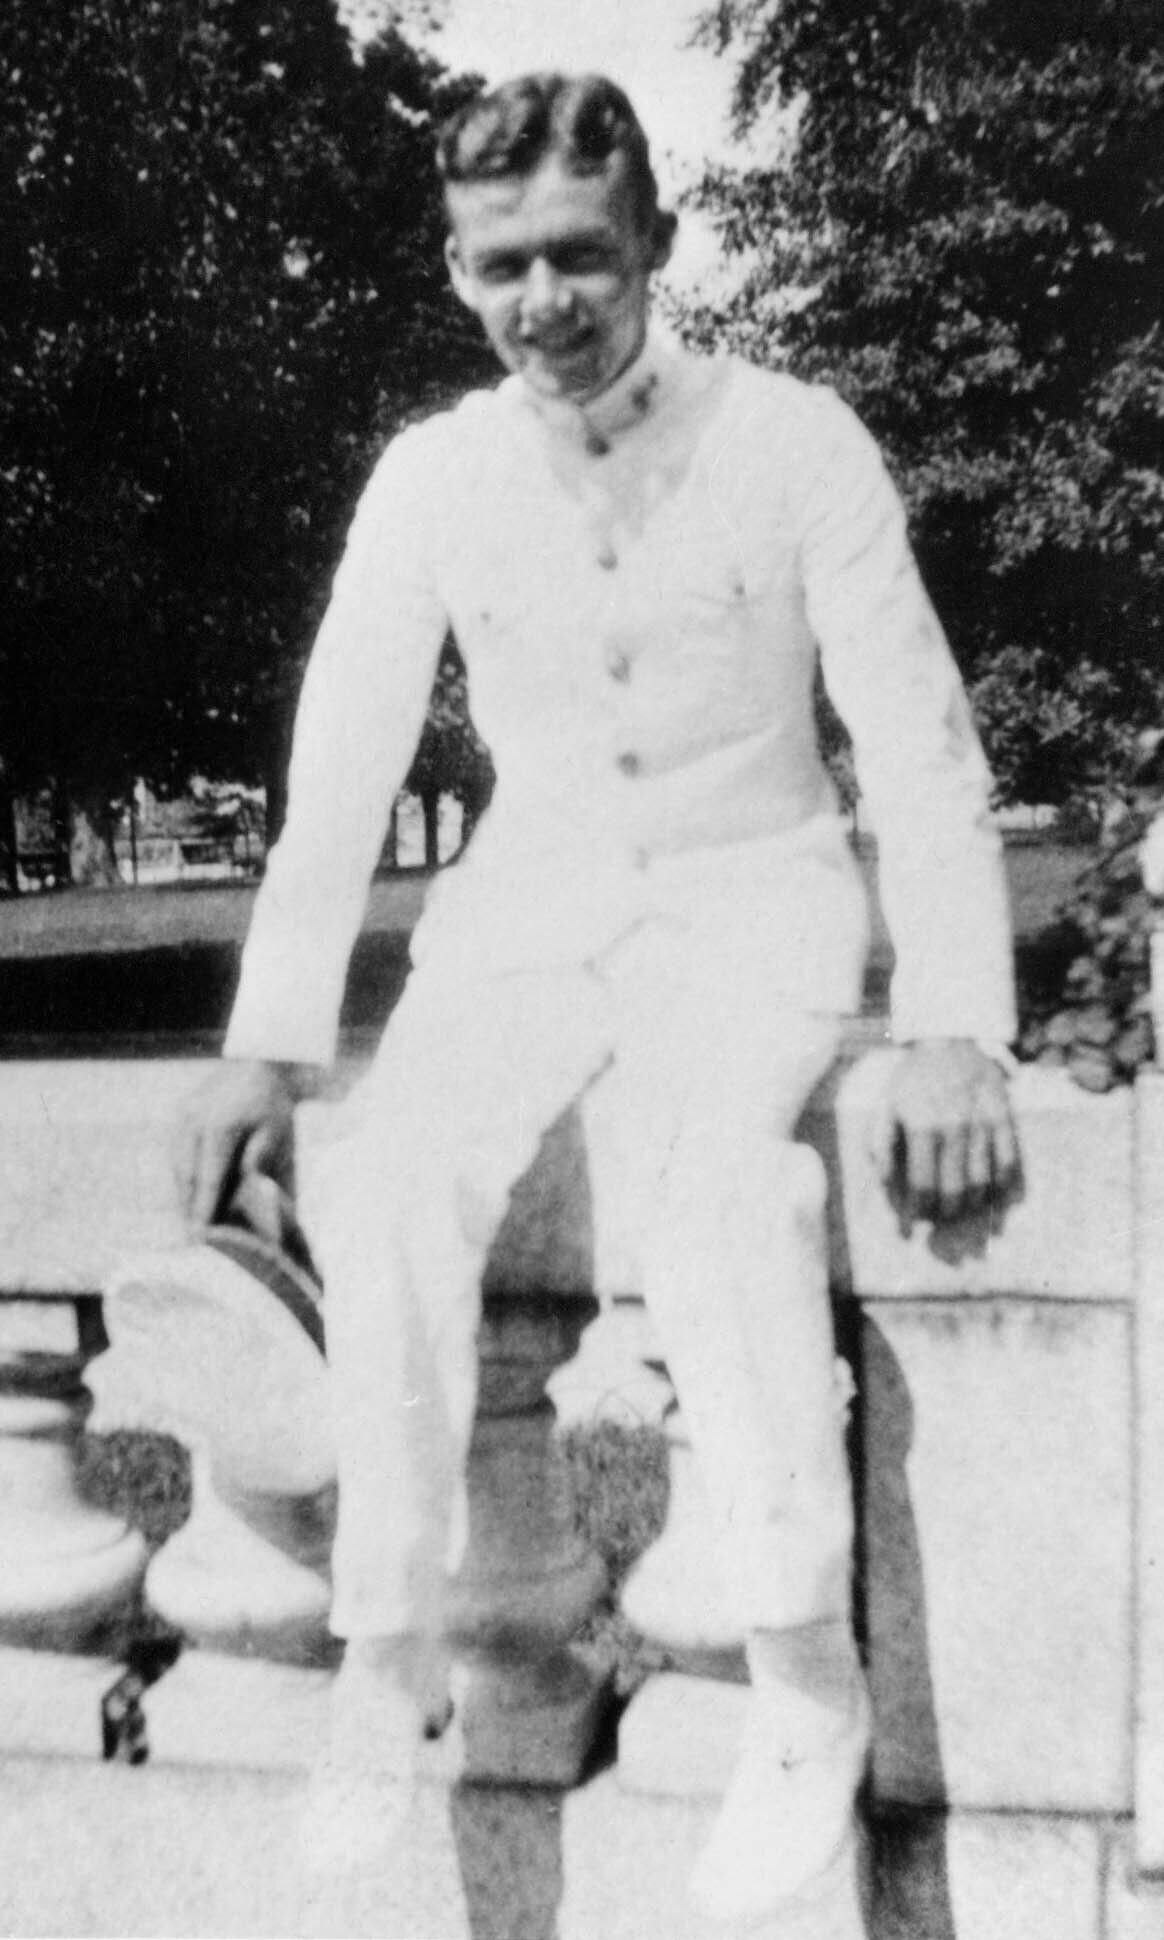 Primary Image of James H. Flatley Jr. at the US Naval Academy